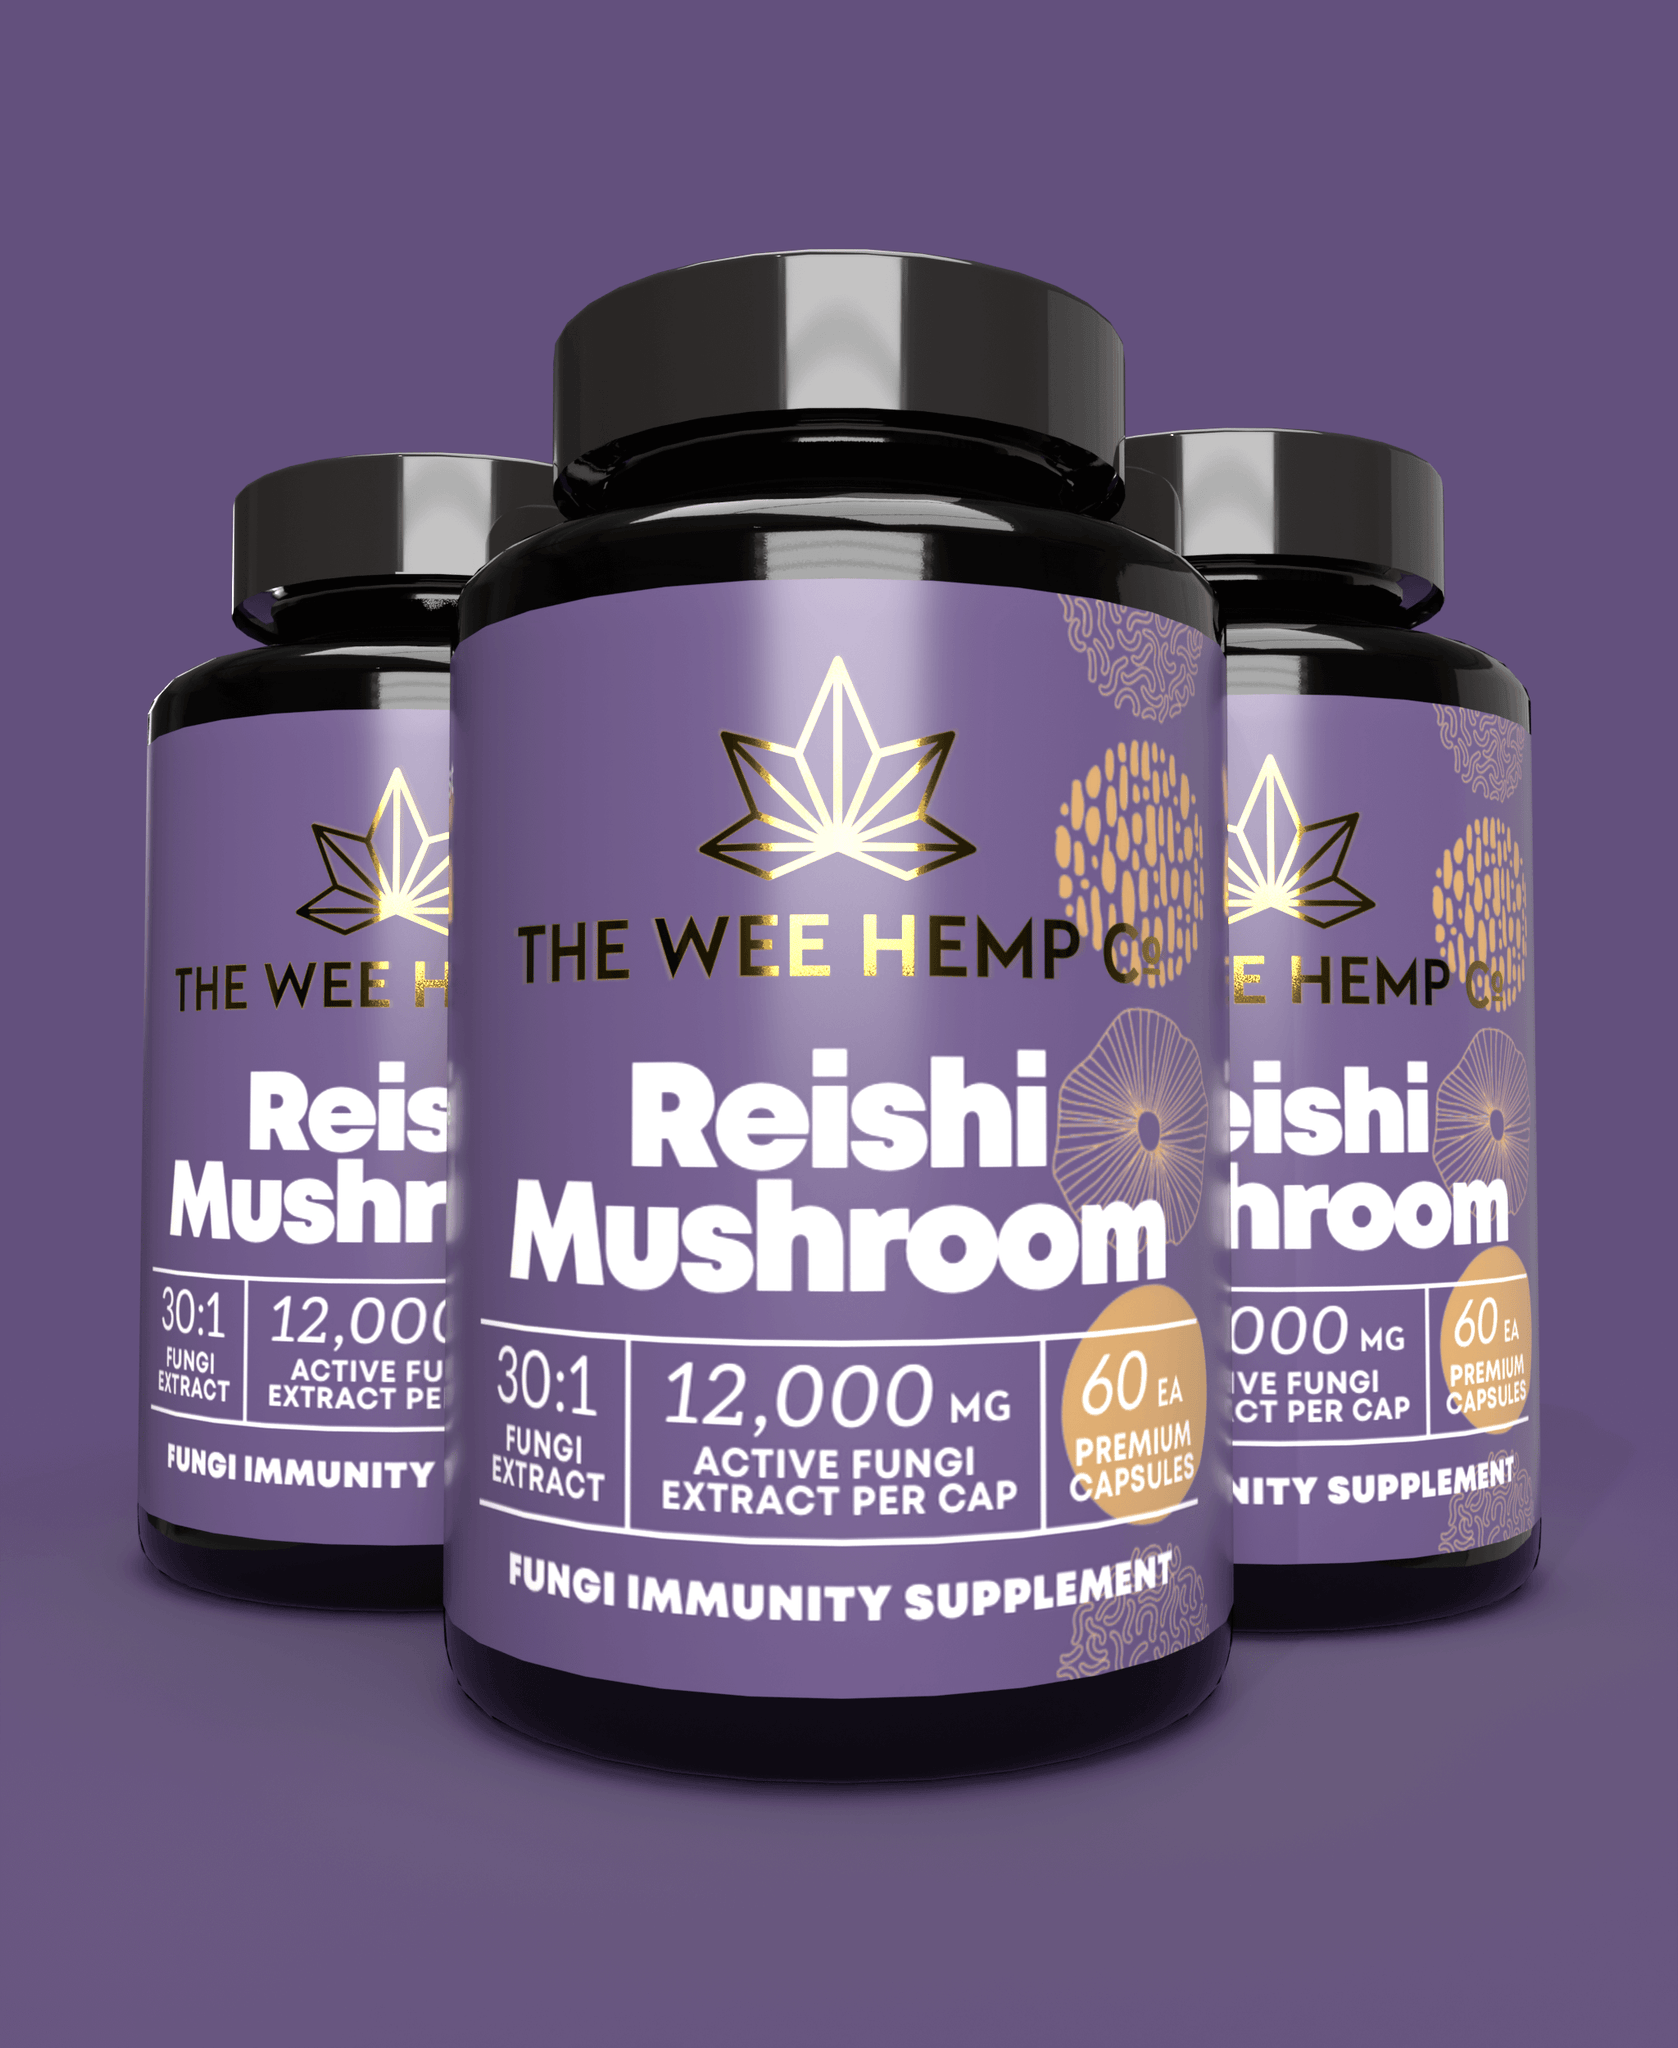 Reishi Mushroom Clean Extract, No Bulking Agents. The Wee Hemp Company, Aberdeenshire, Scotland. Blue background with mushroom supplements in foreground. Scotland's Leading CBD Company.